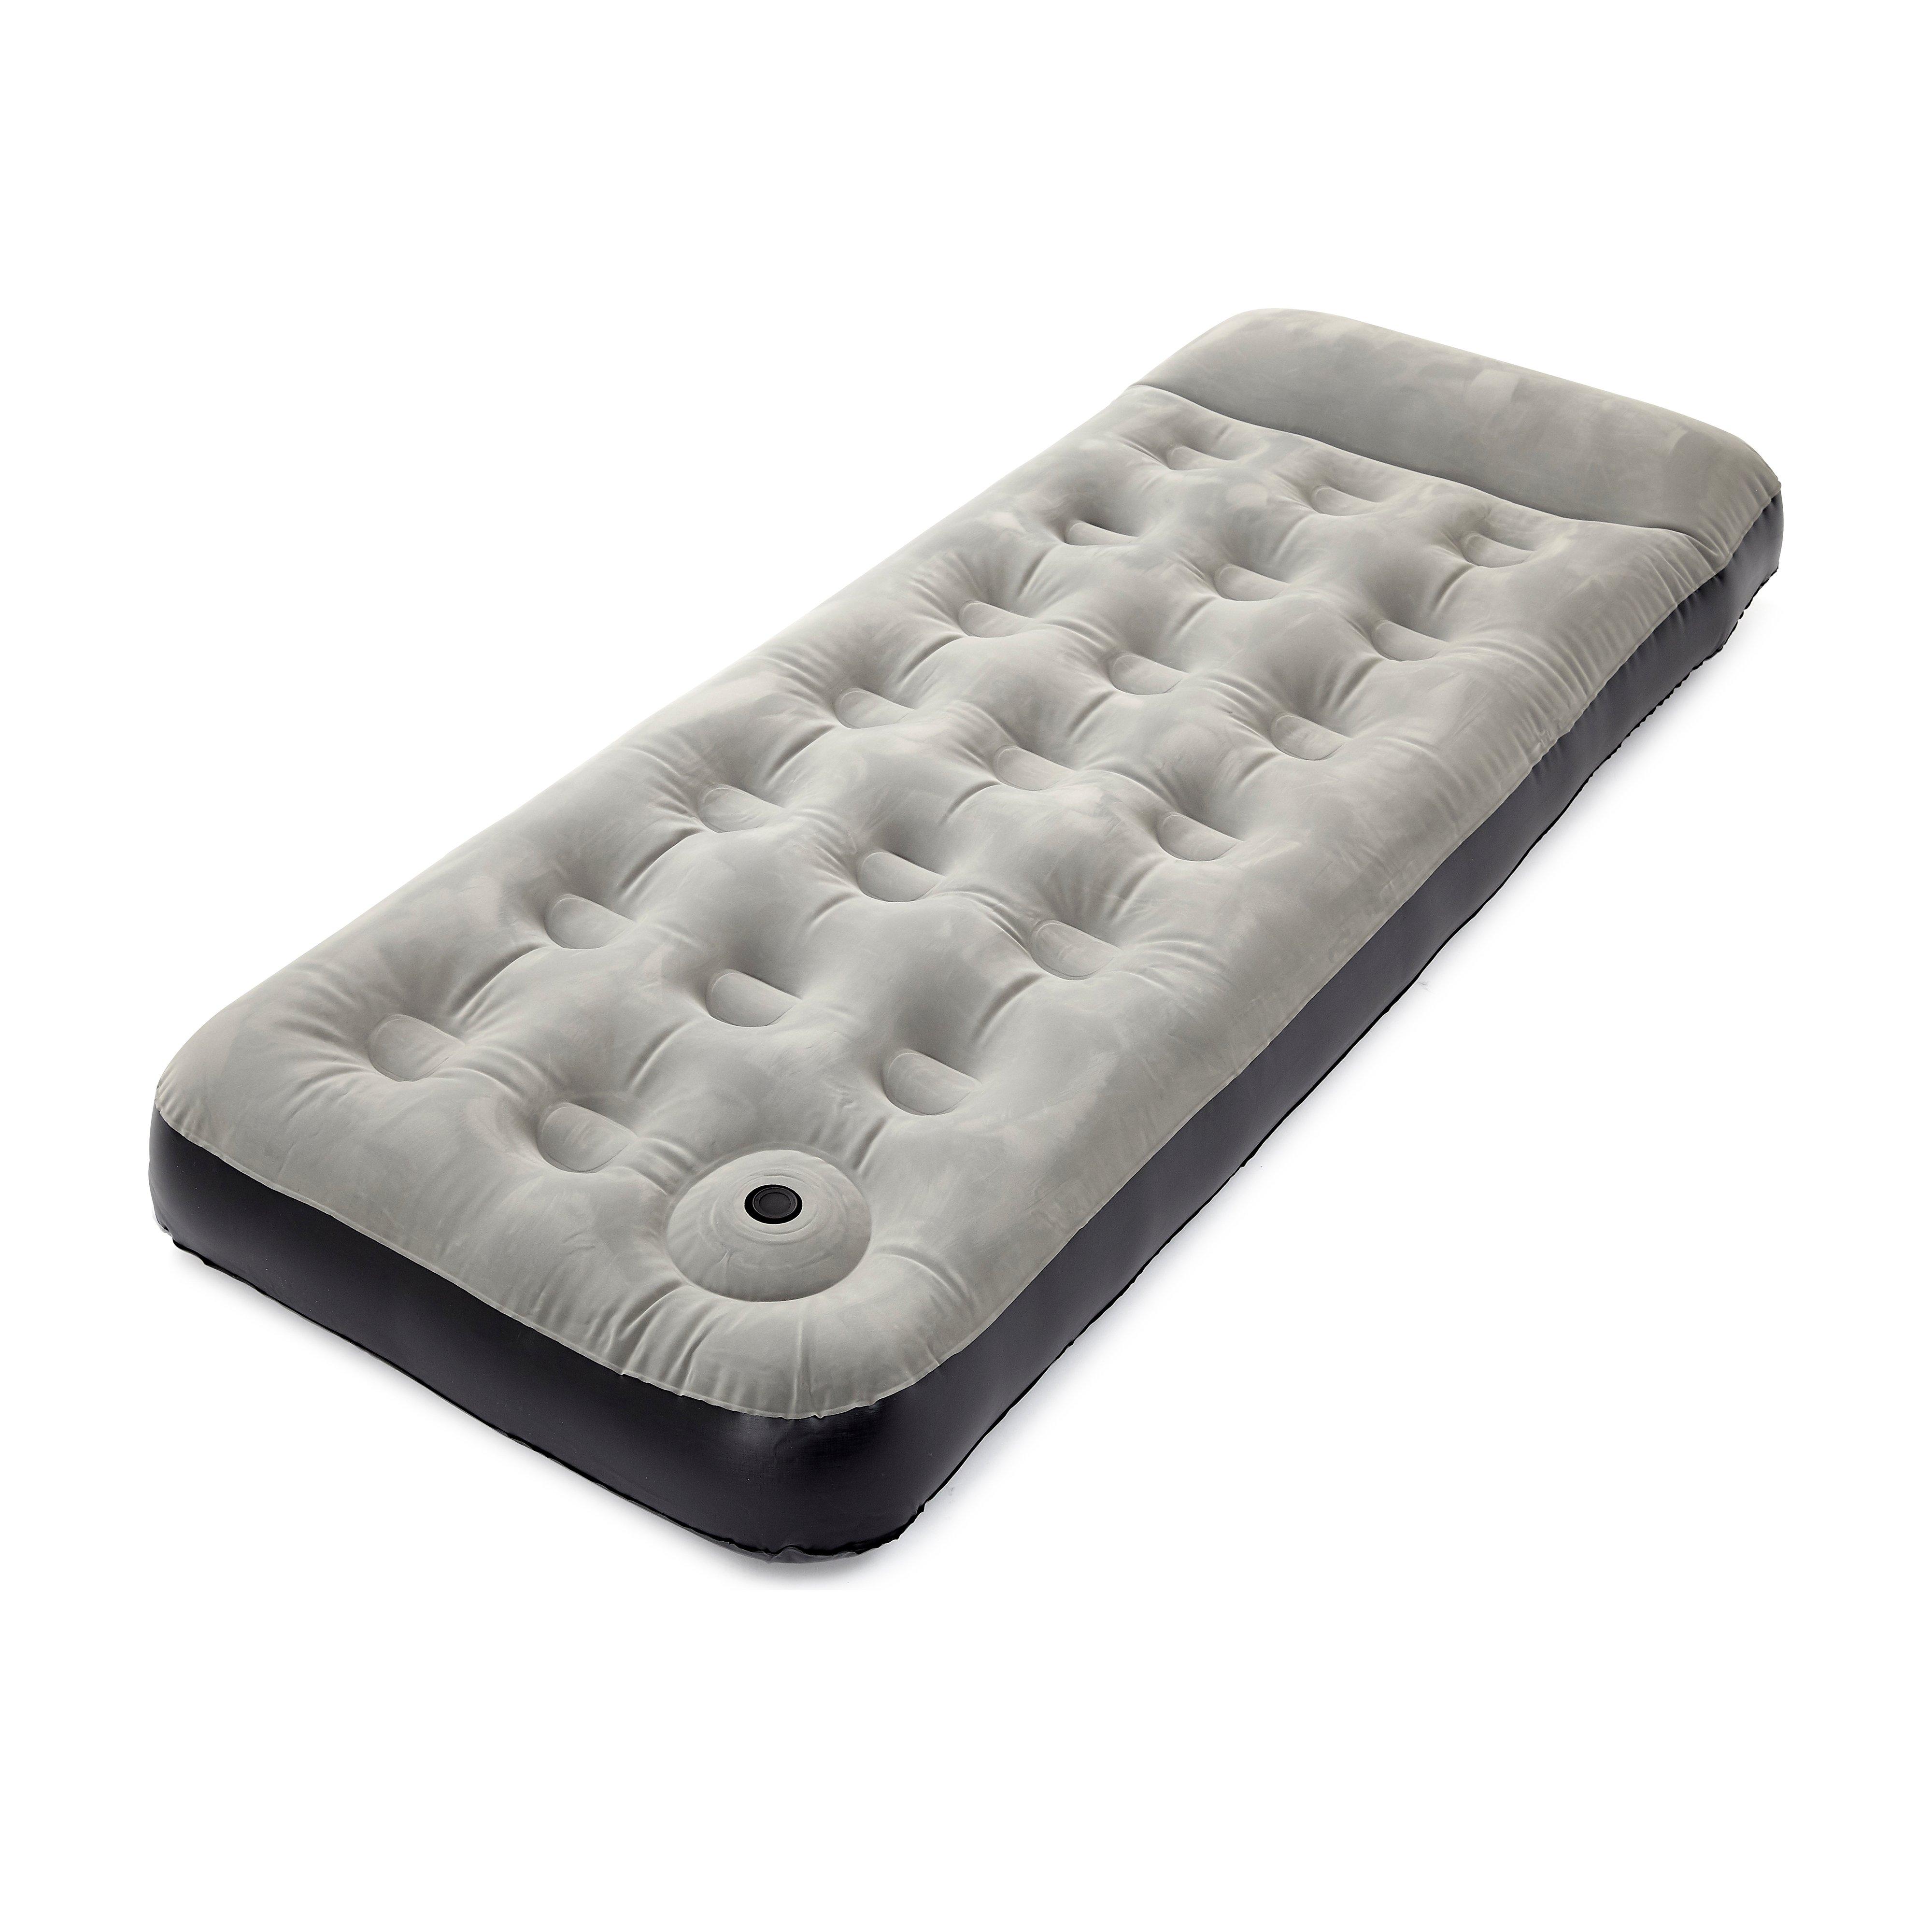 Photos - Inflatable Mattress Hi-Gear Deluxe Single Airbed with Pump, White 